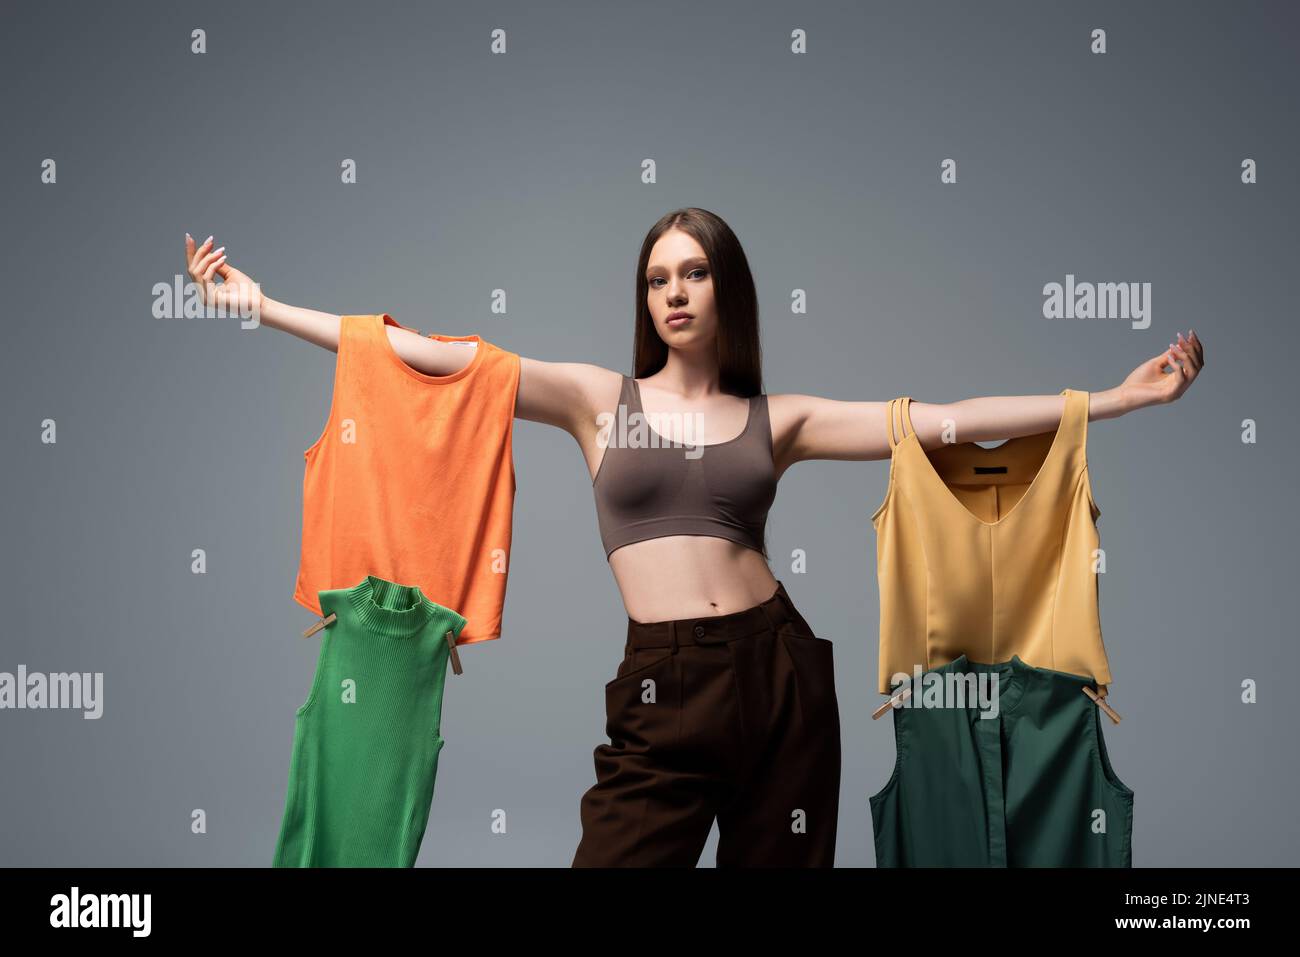 pretty model in crop top and trousers standing with outstretched hands and holding clothing on grey Stock Photo